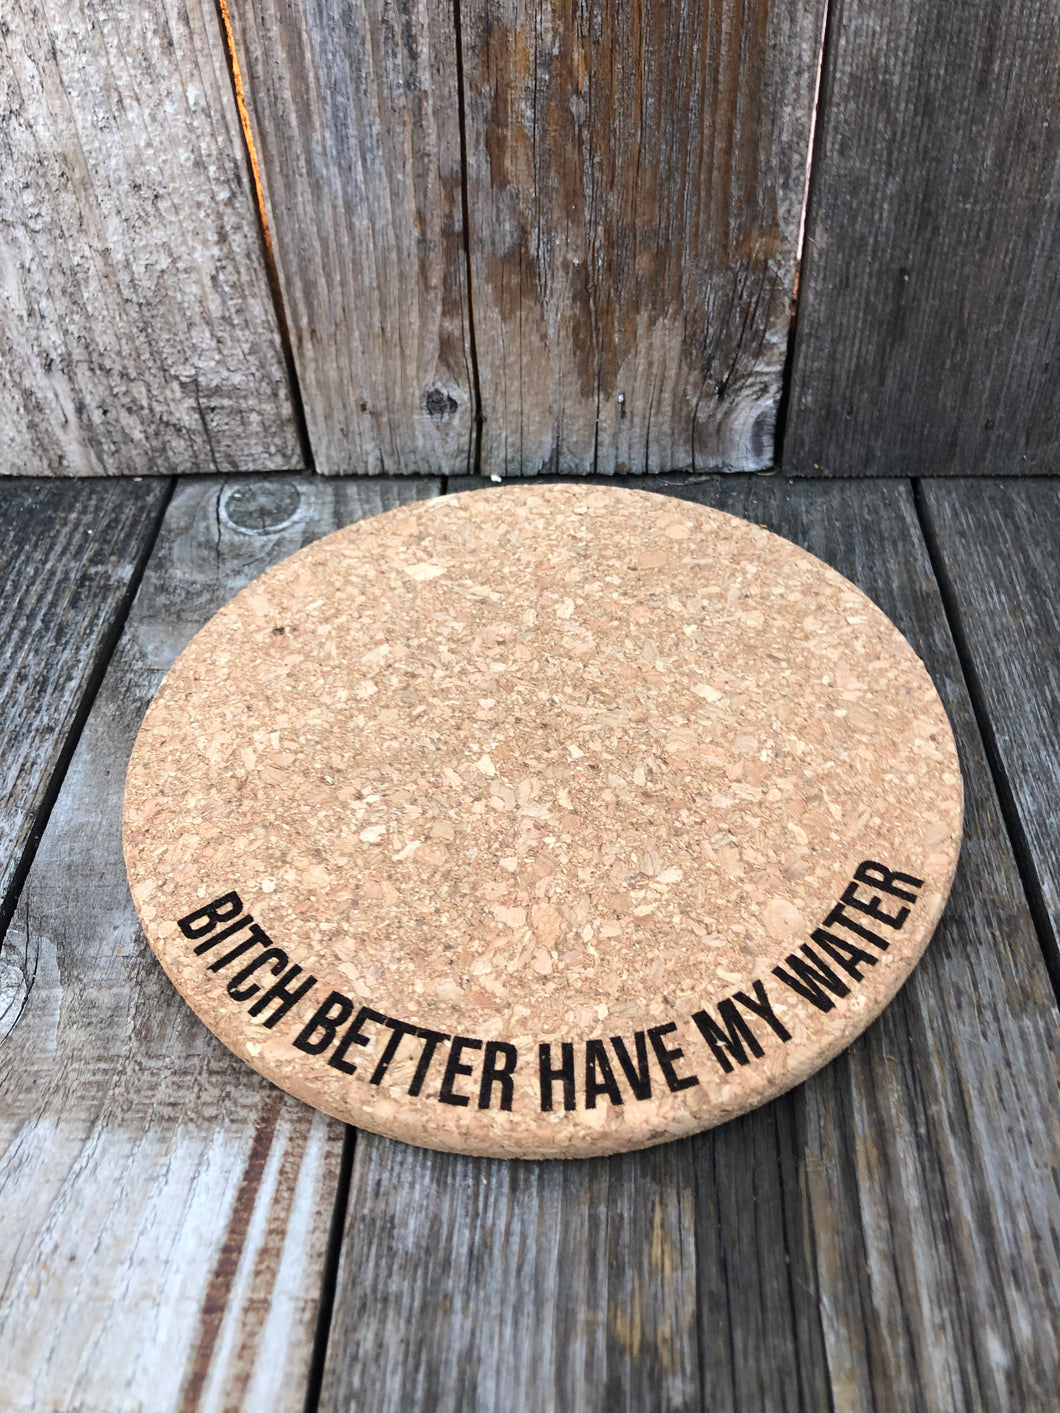 Bitch Better Have My Water Cork Plant Mat - Engraved Cork Round - Cork Bottom - No Plastic or Rubber - All Natural Material